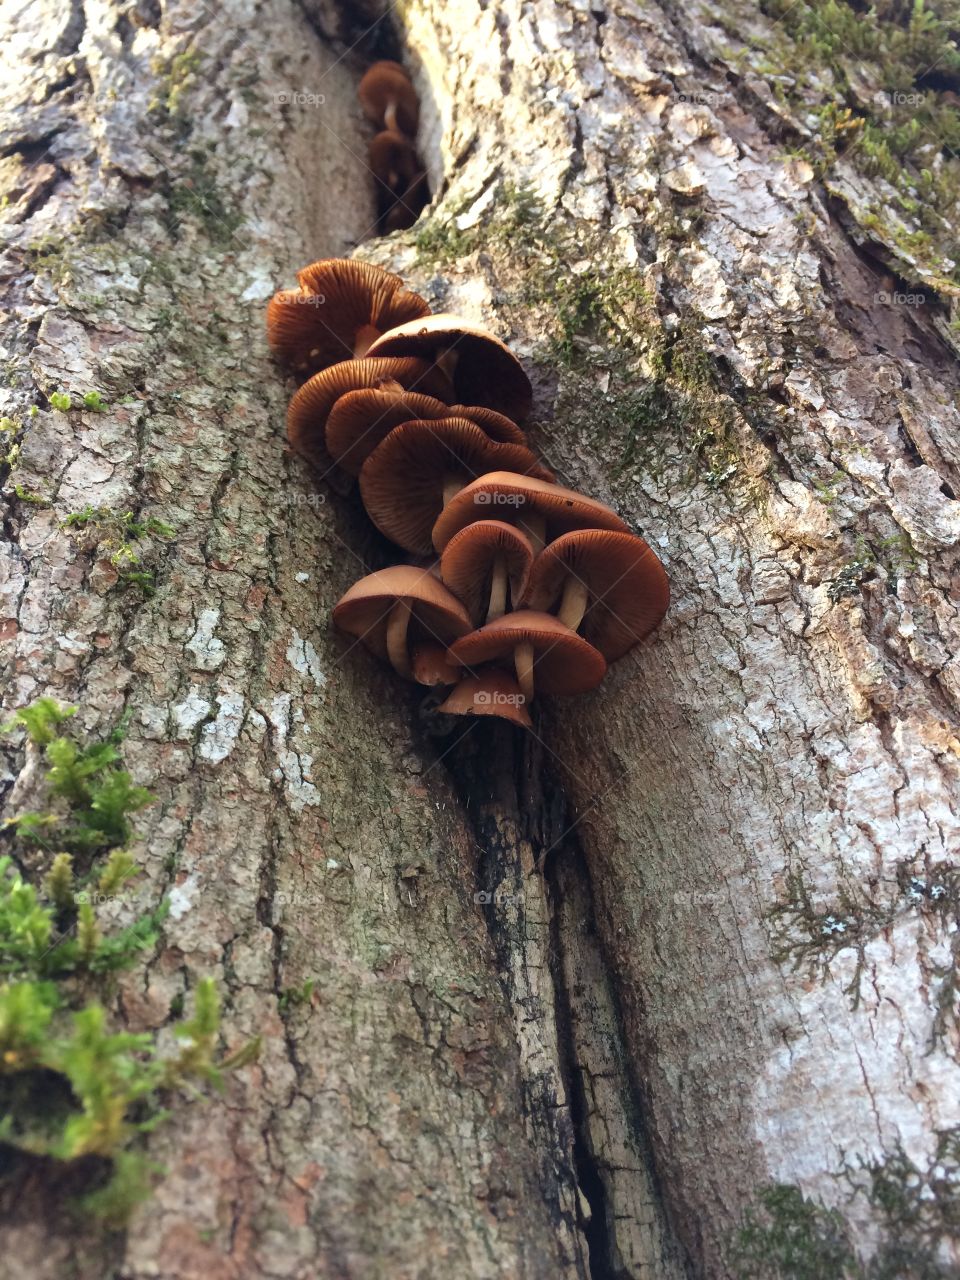 Mushrooms growing in a crevice of a tree